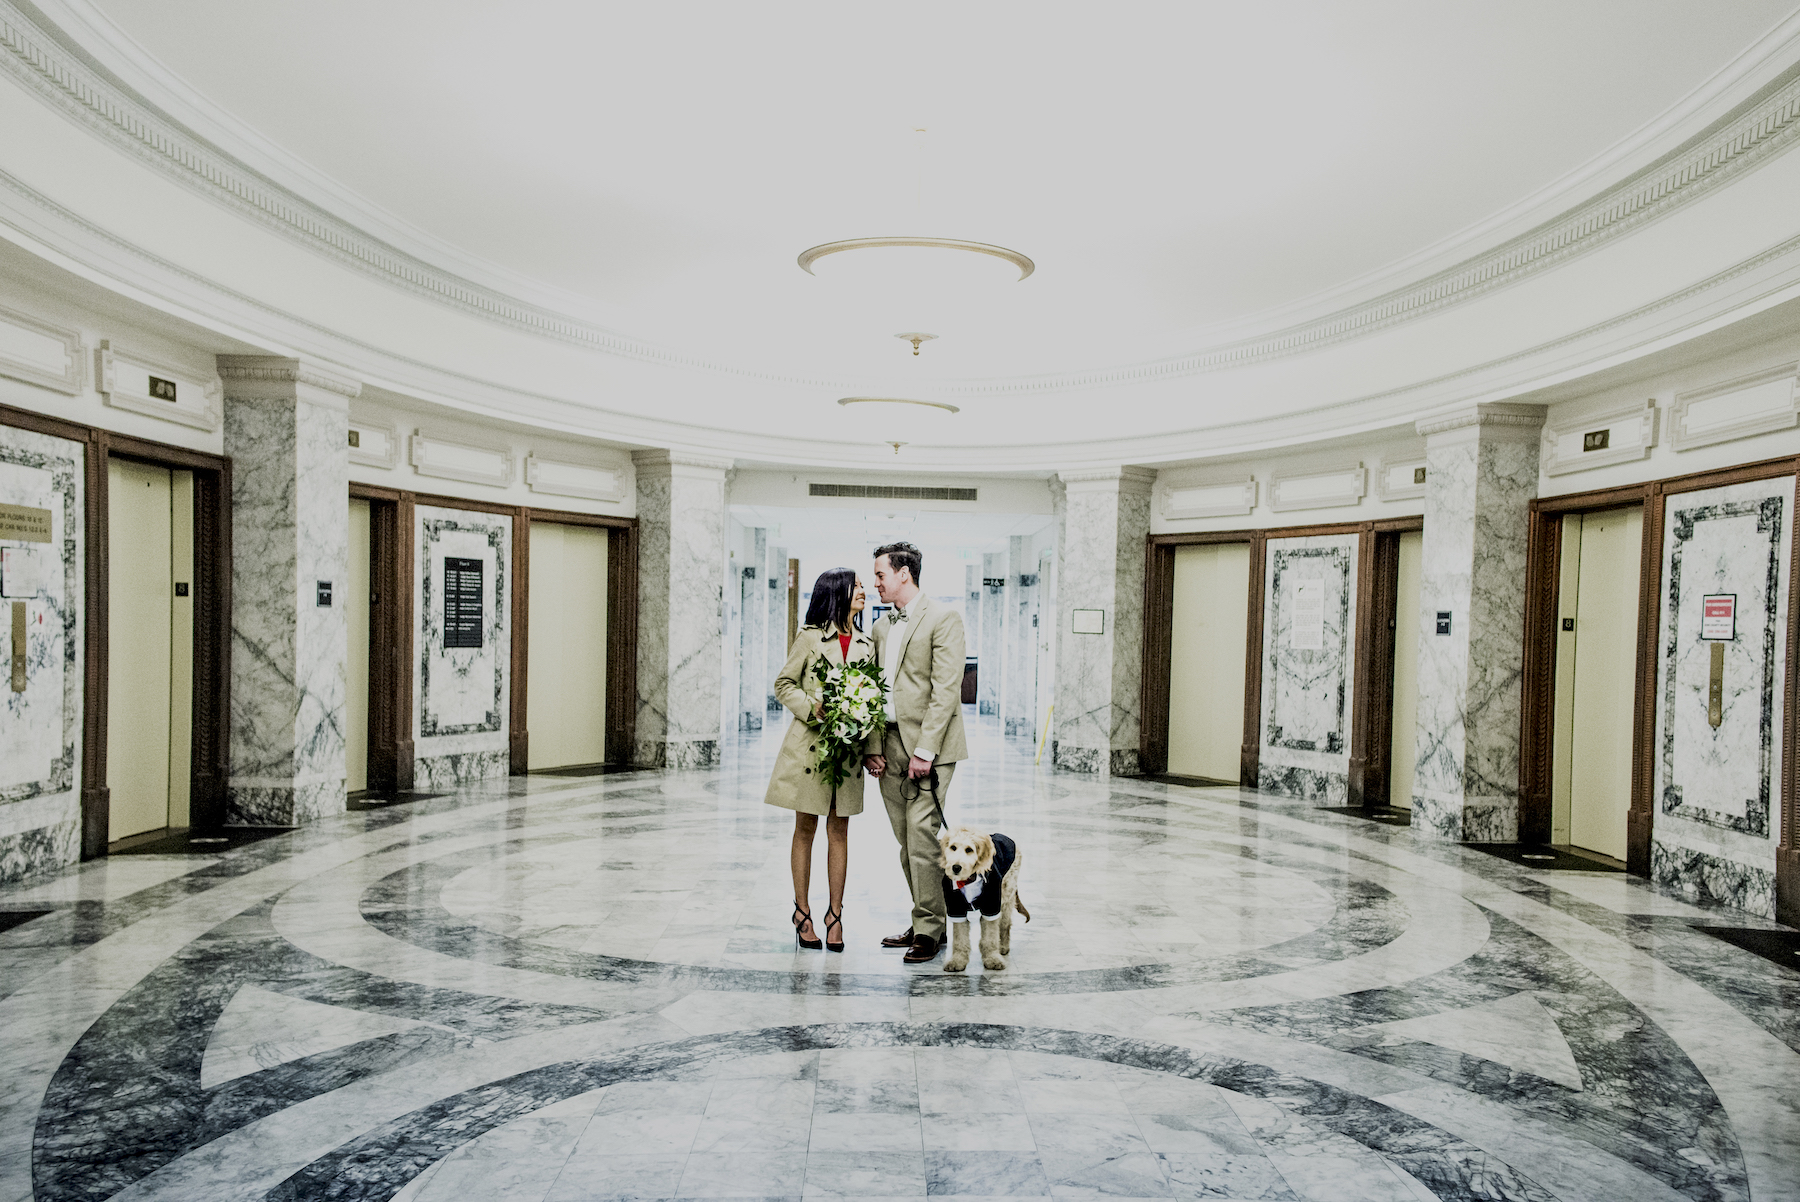 add-newphotography_by_jane_speleers_2017_seattle_court_house_wedding-dsc_9236